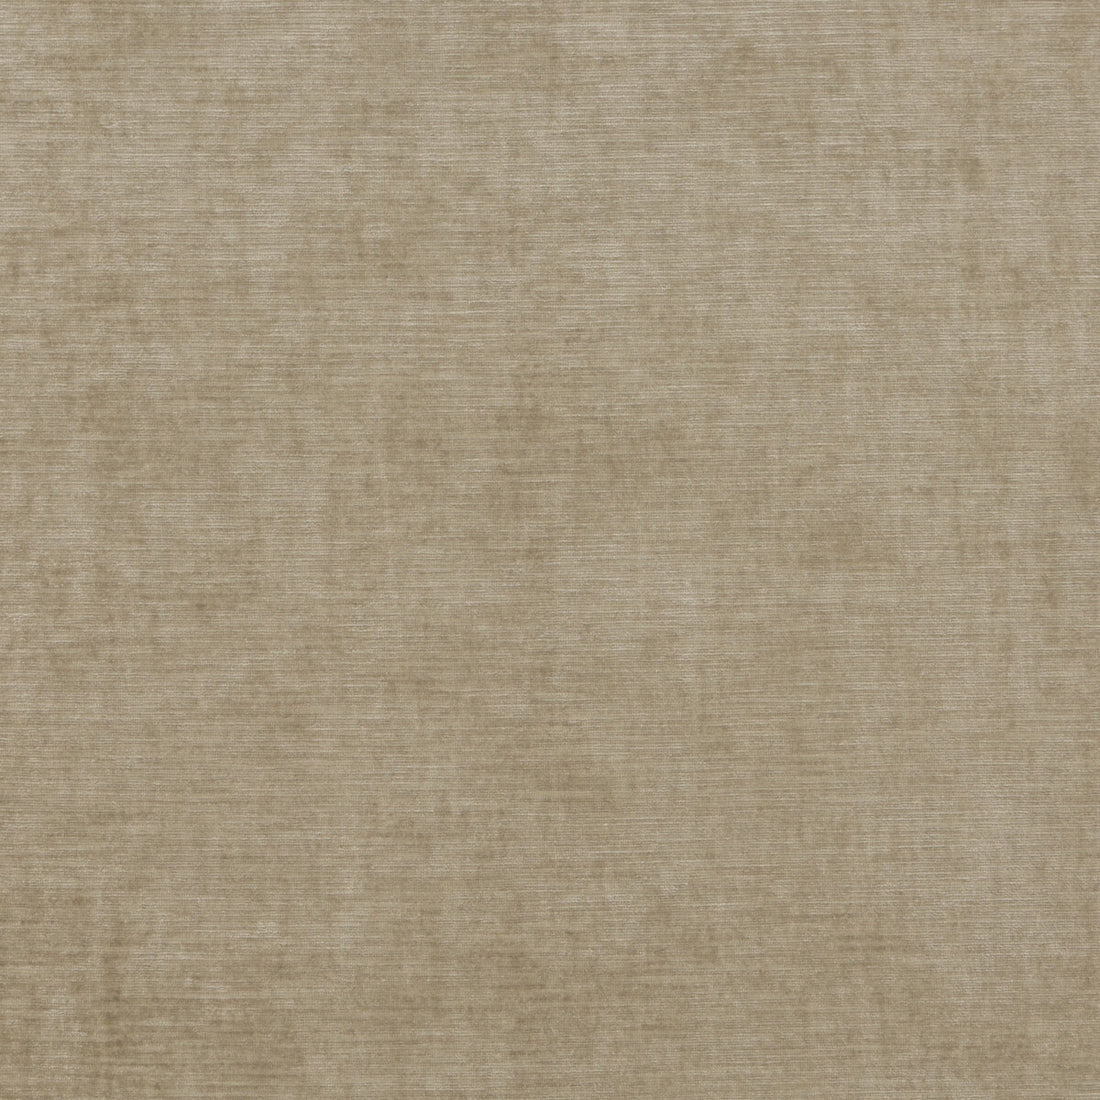 Meridian Velvet fabric in oatmeal color - pattern ED85292.230.0 - by Threads in the Meridian collection